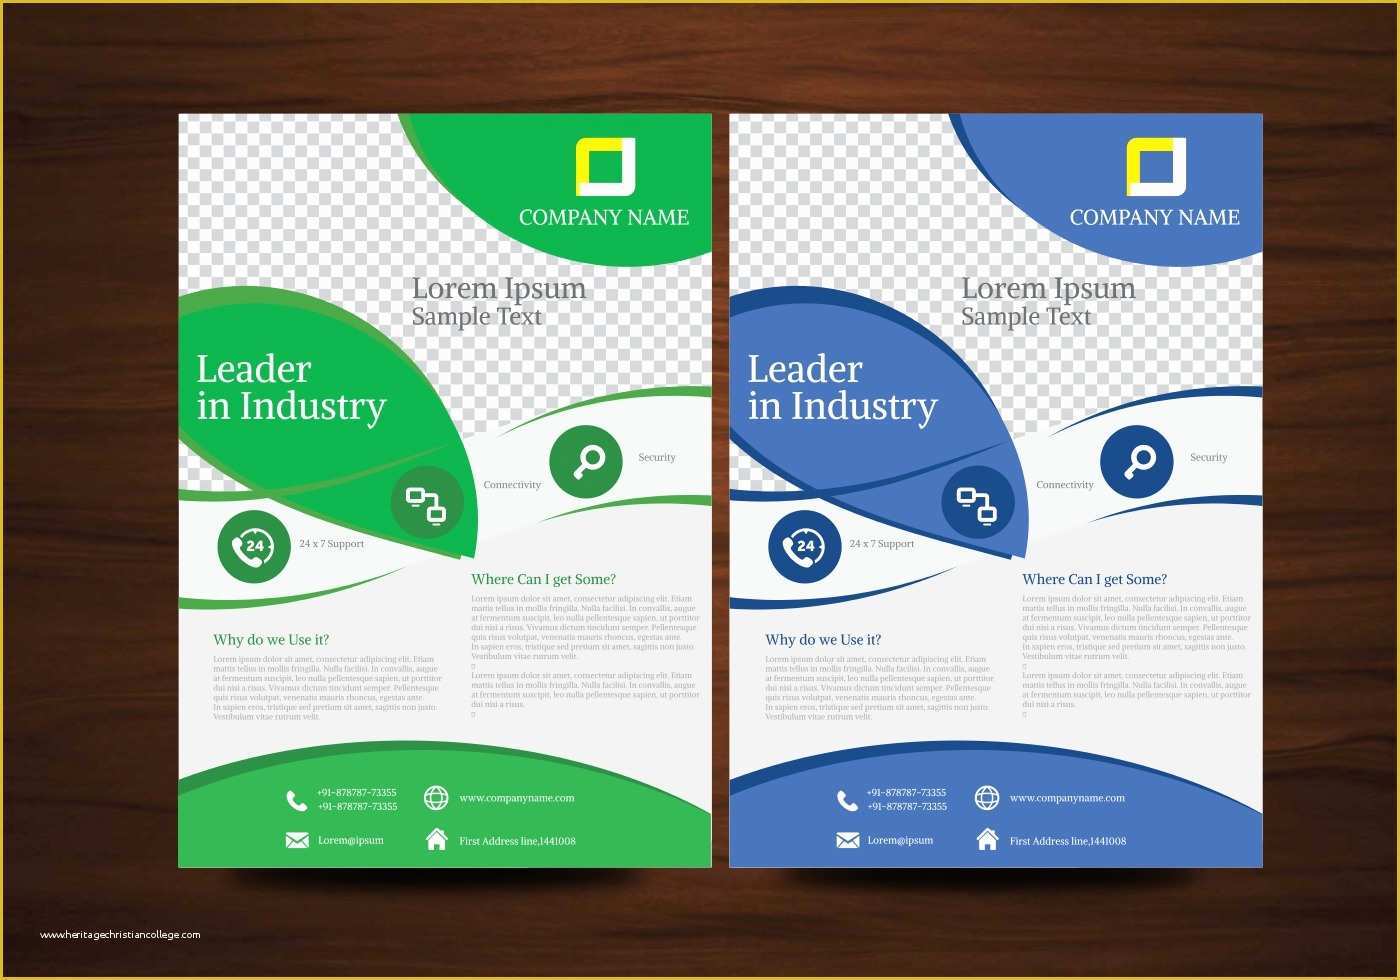 Template for Brochure Design Free Download Of Blue and Green Vector Brochure Flyer Design Template